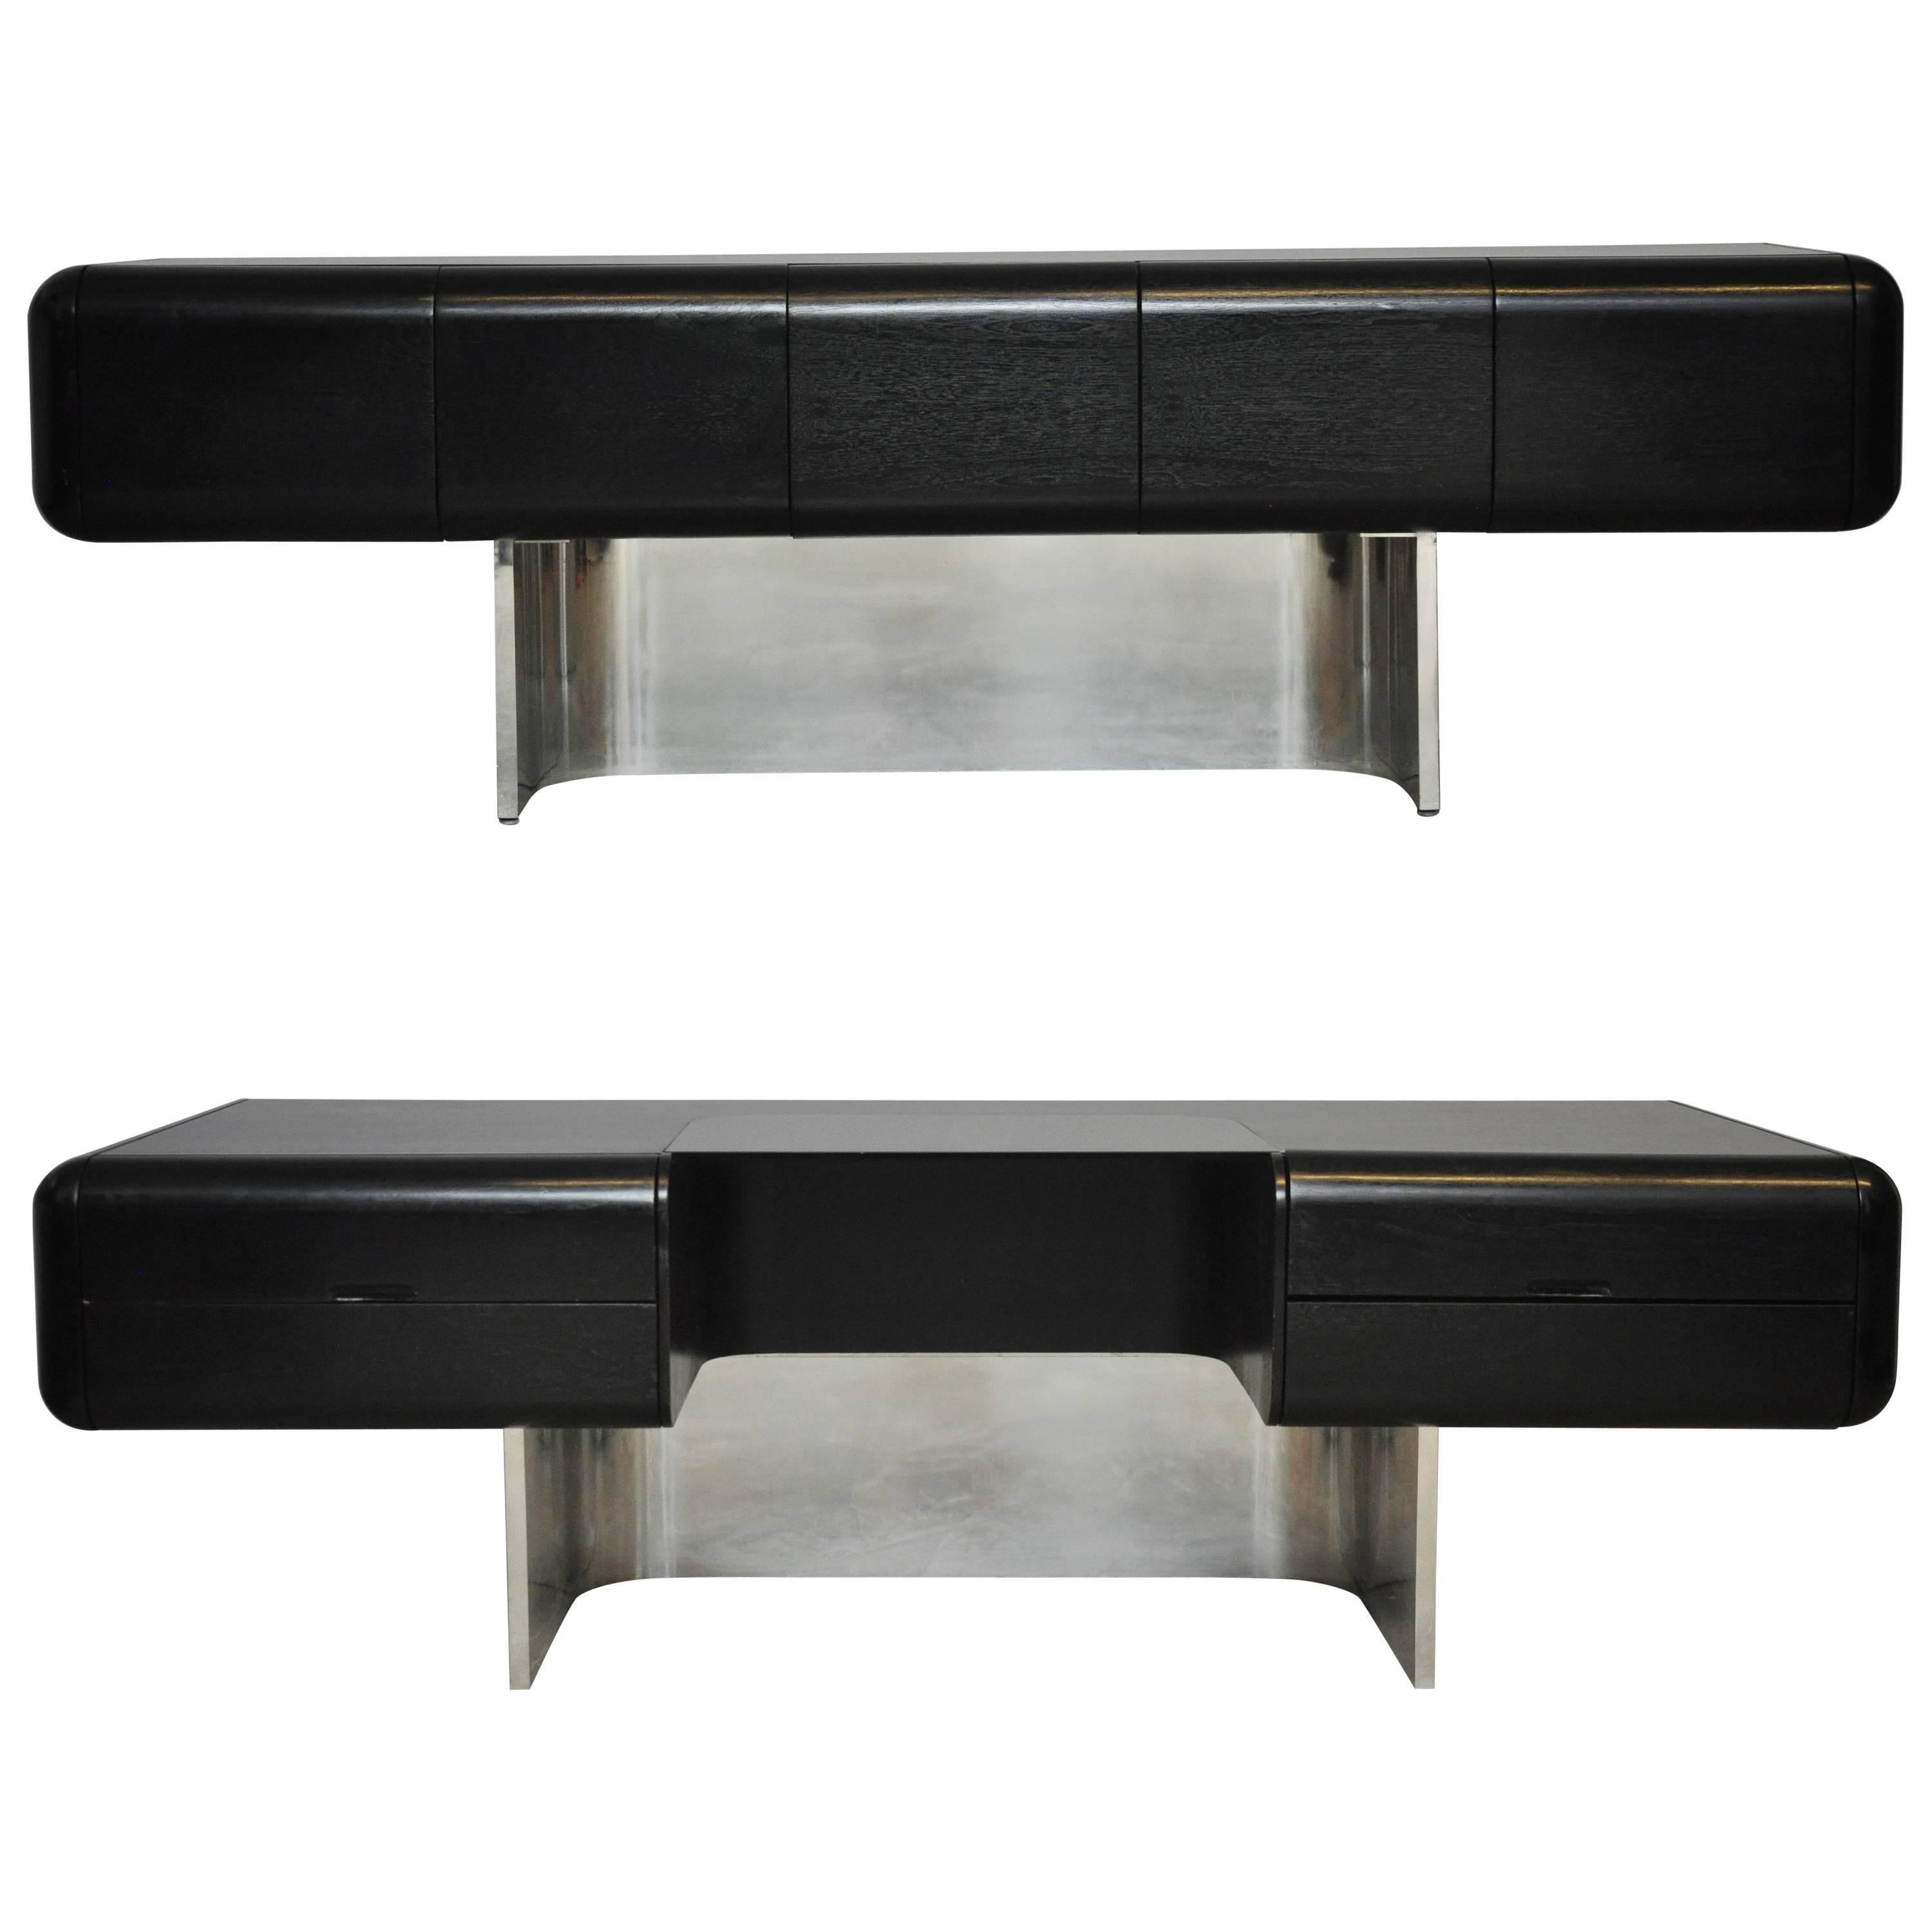 M.F. Harty Black Lacquer and Stainless Steel Executive Desk and Credenza